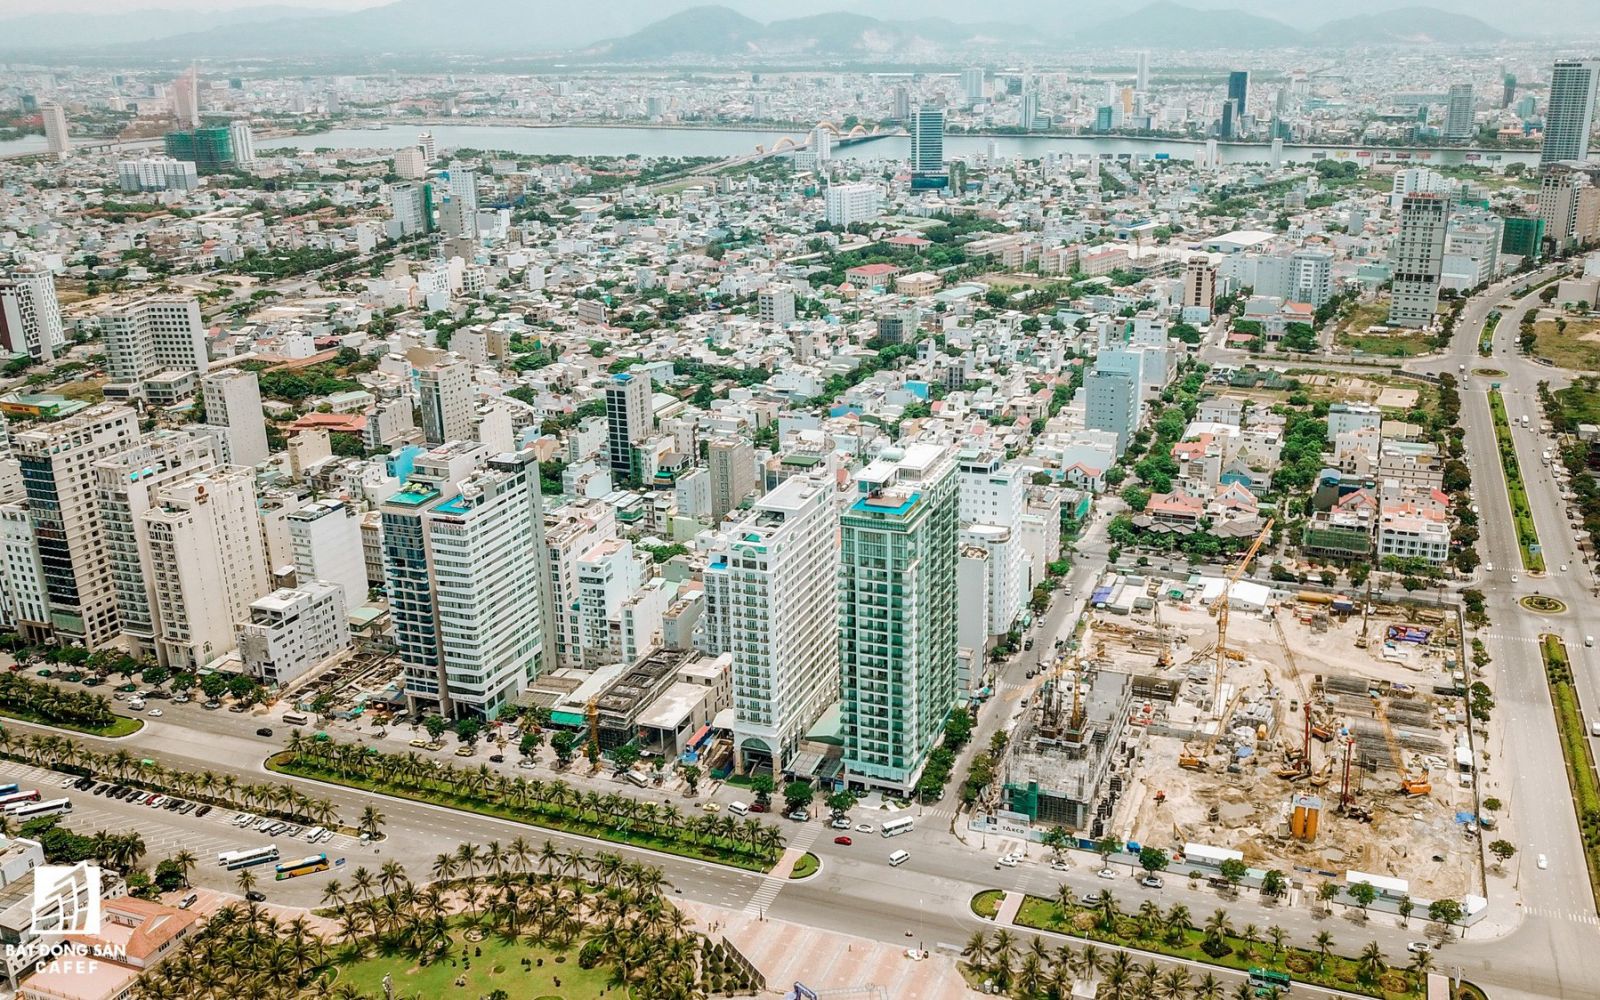 The coastal city of Da Nang is calling for investments in 10 infrastructure projects. (Photo: cafef)